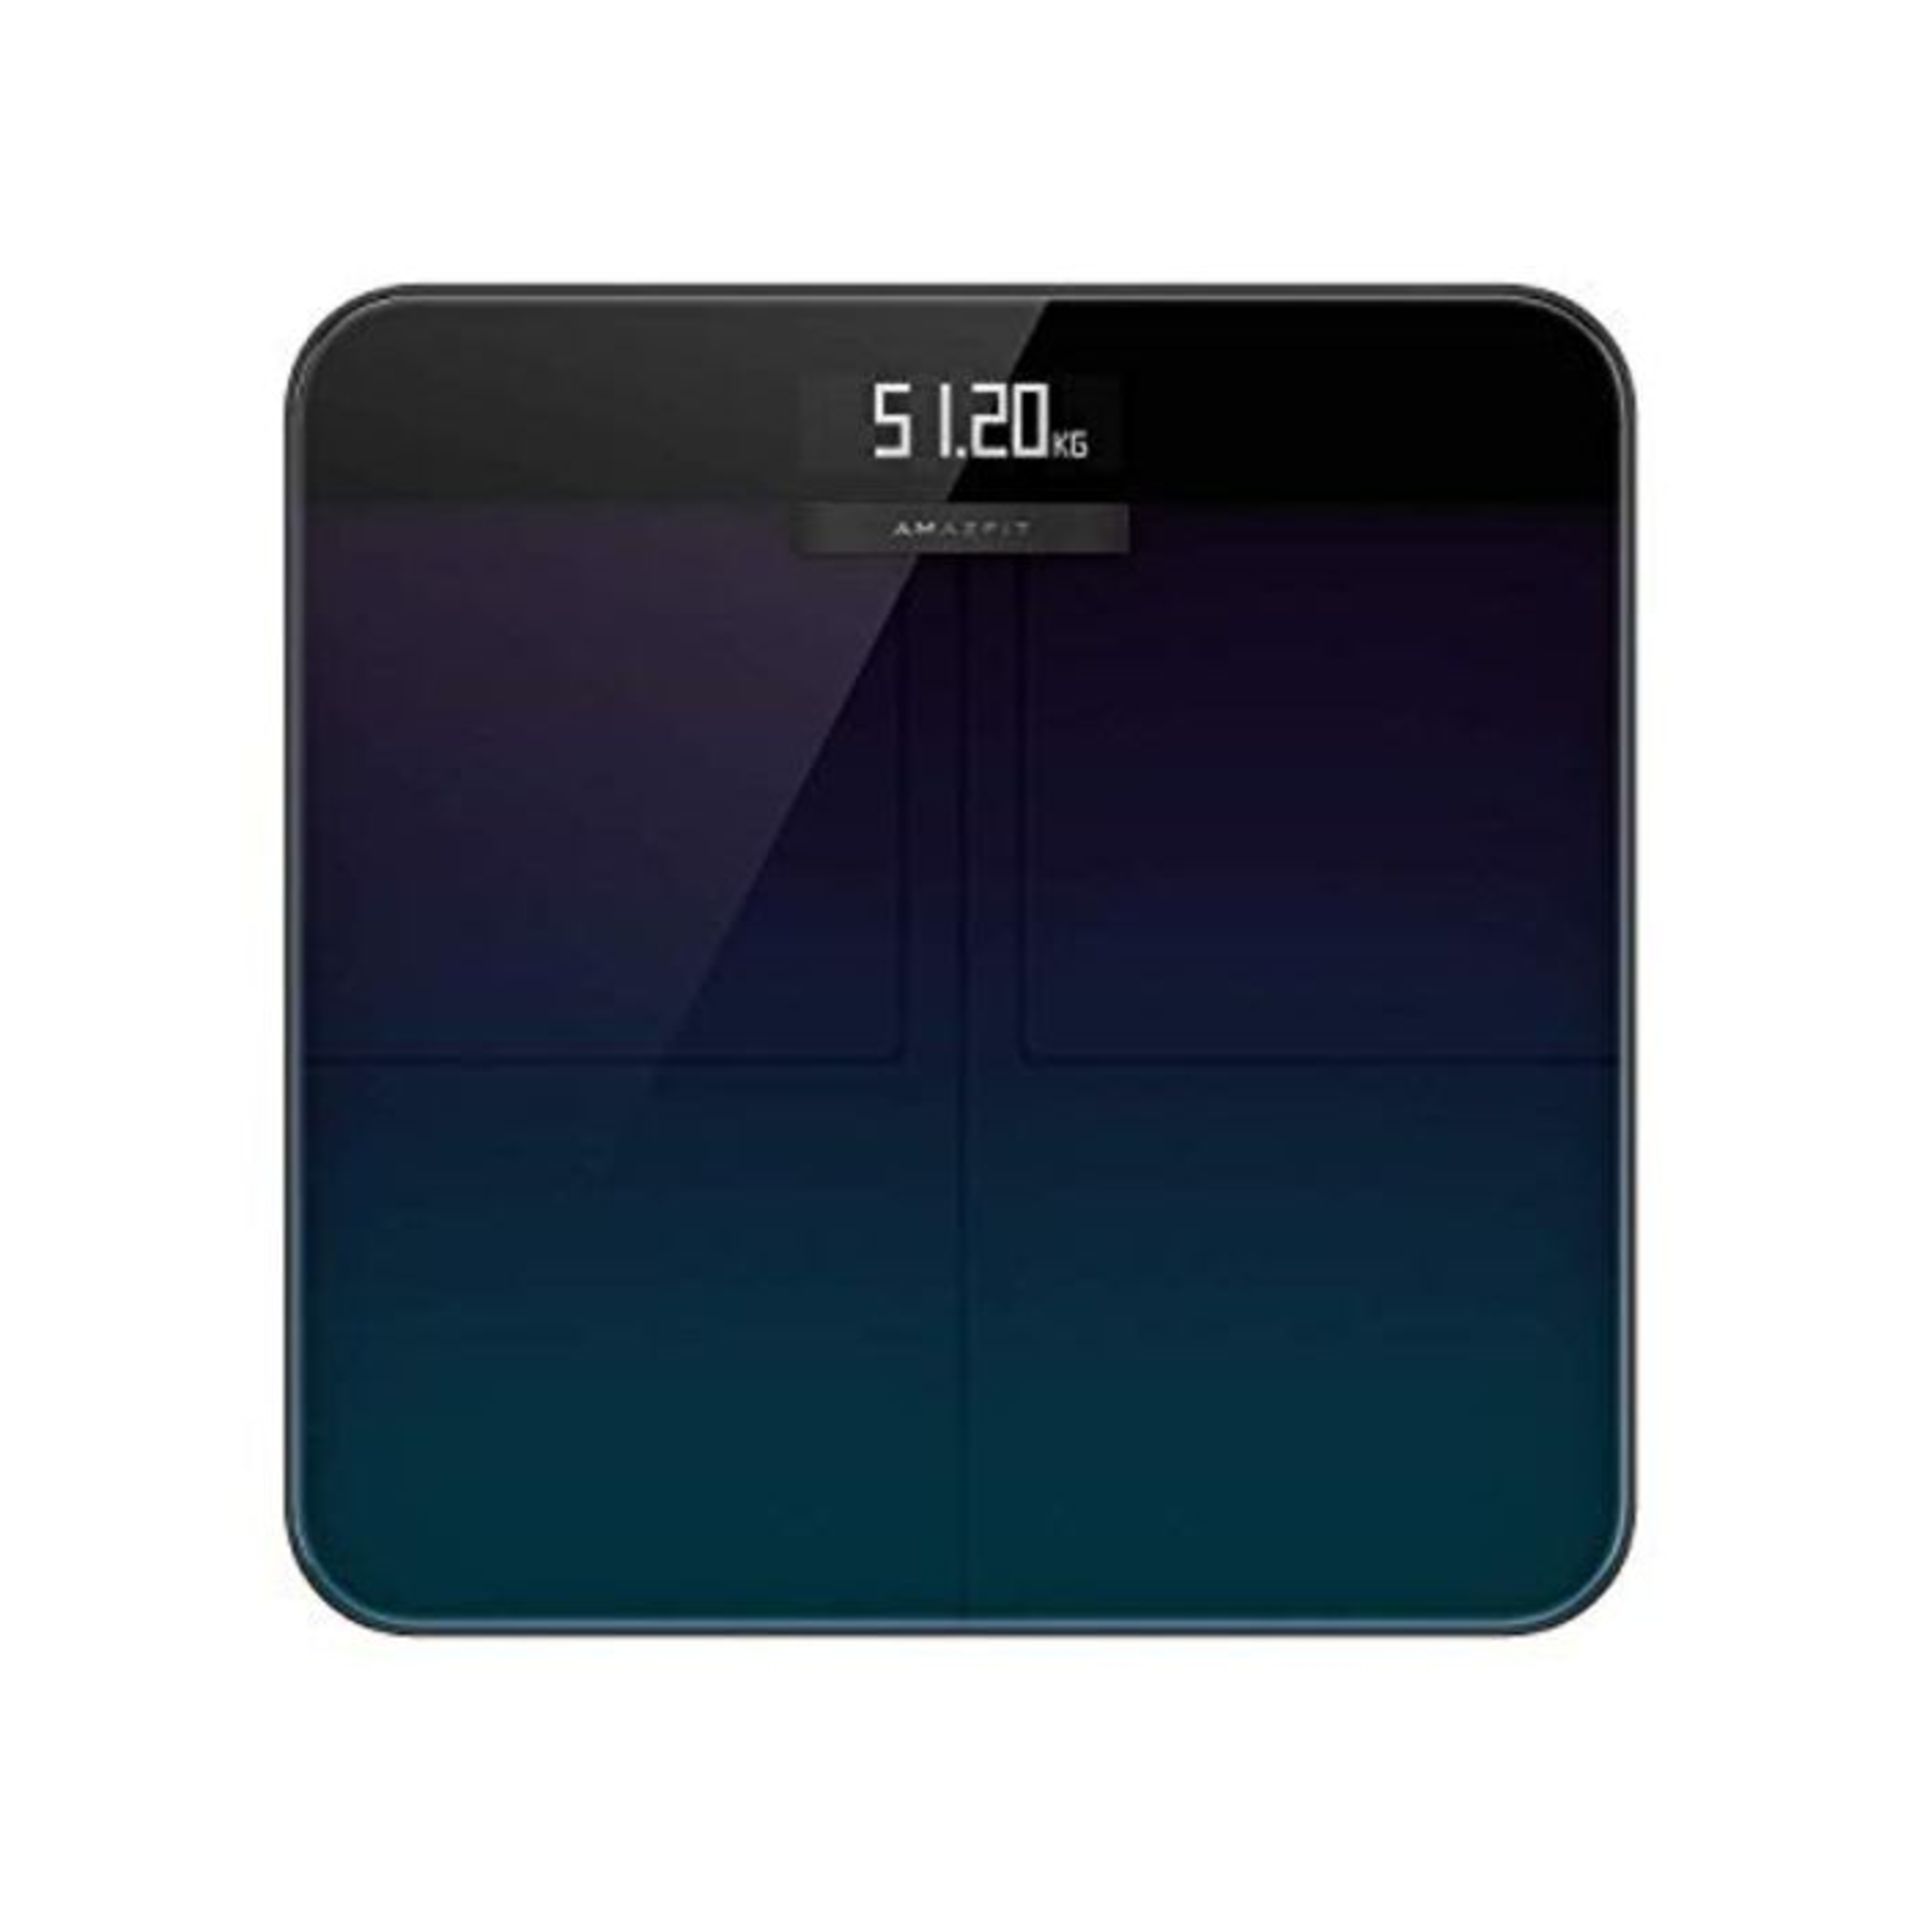 Amazfit Body Composition Smart Scale, Digital Bathroom Scale, Body Weight Monitor, Bod